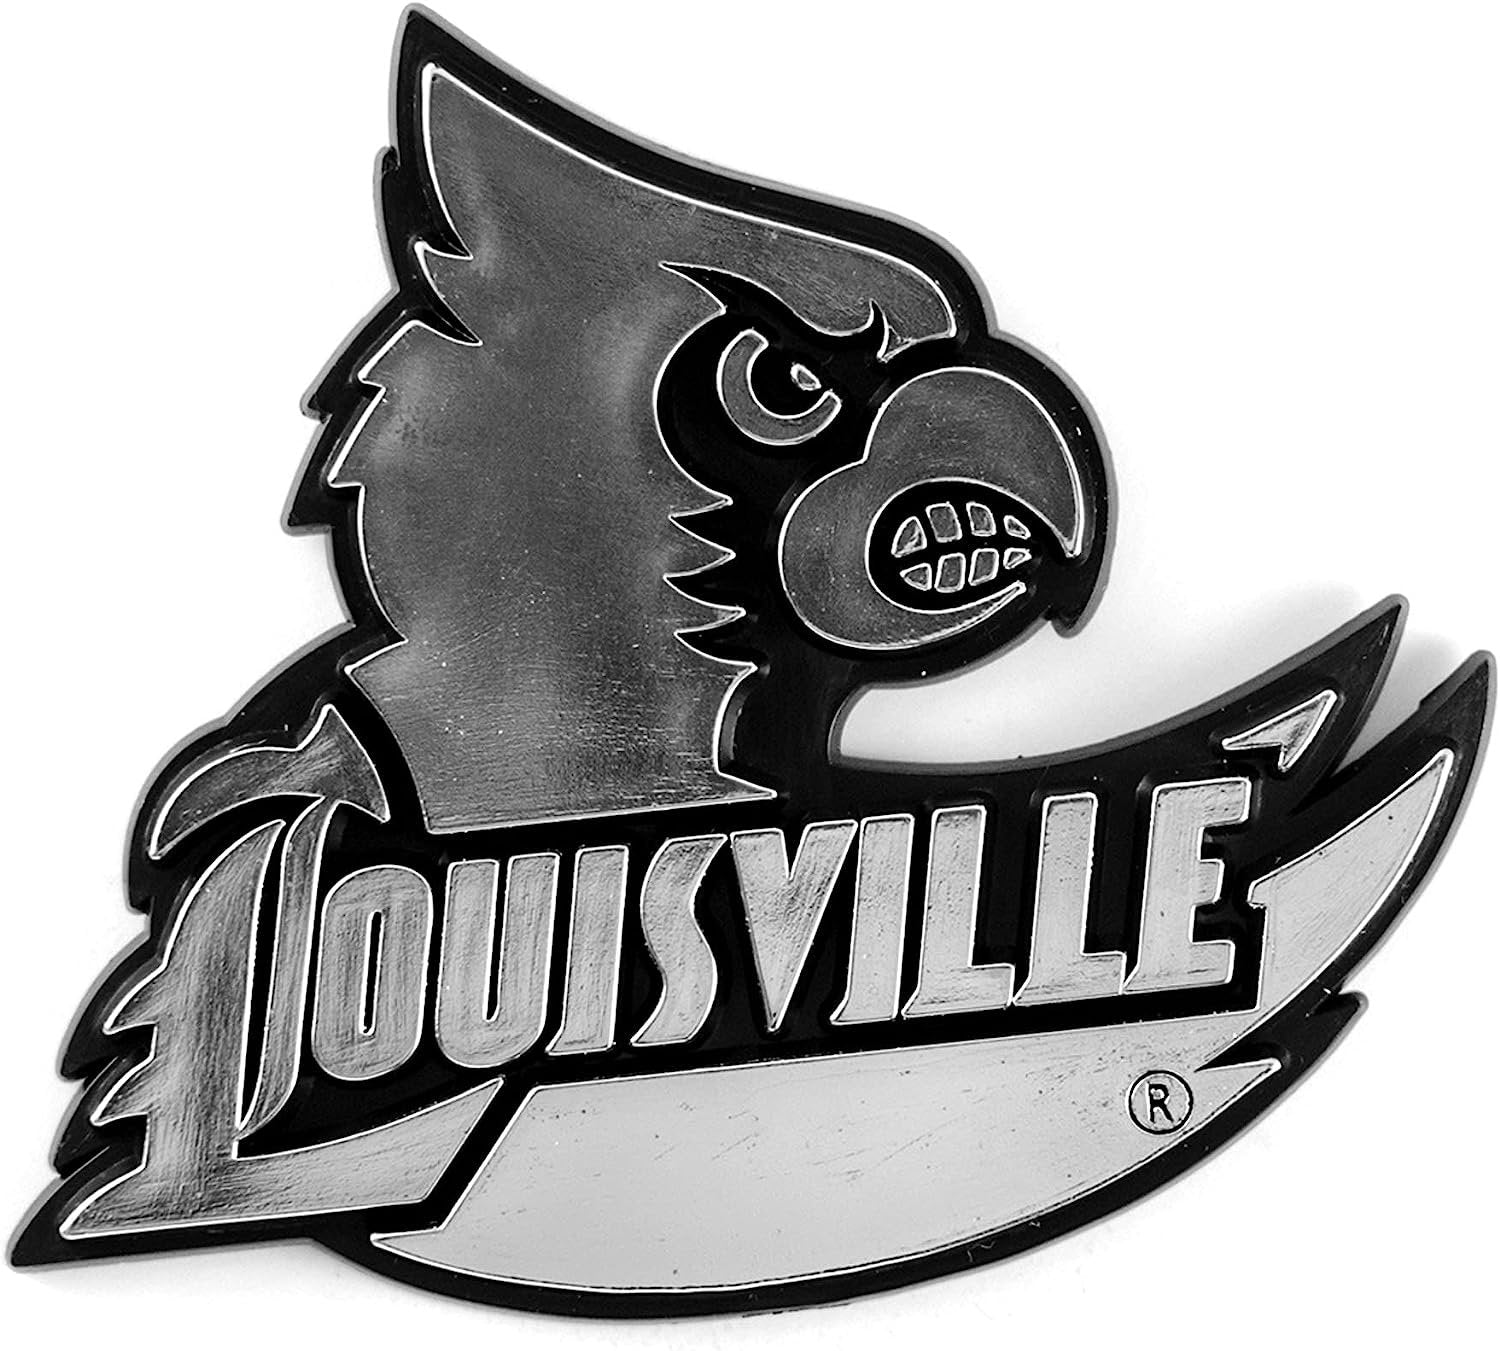 University of Louisville Cardinals Silver Chrome Color Auto Emblem Molded Raised Adhesive Tape Backing